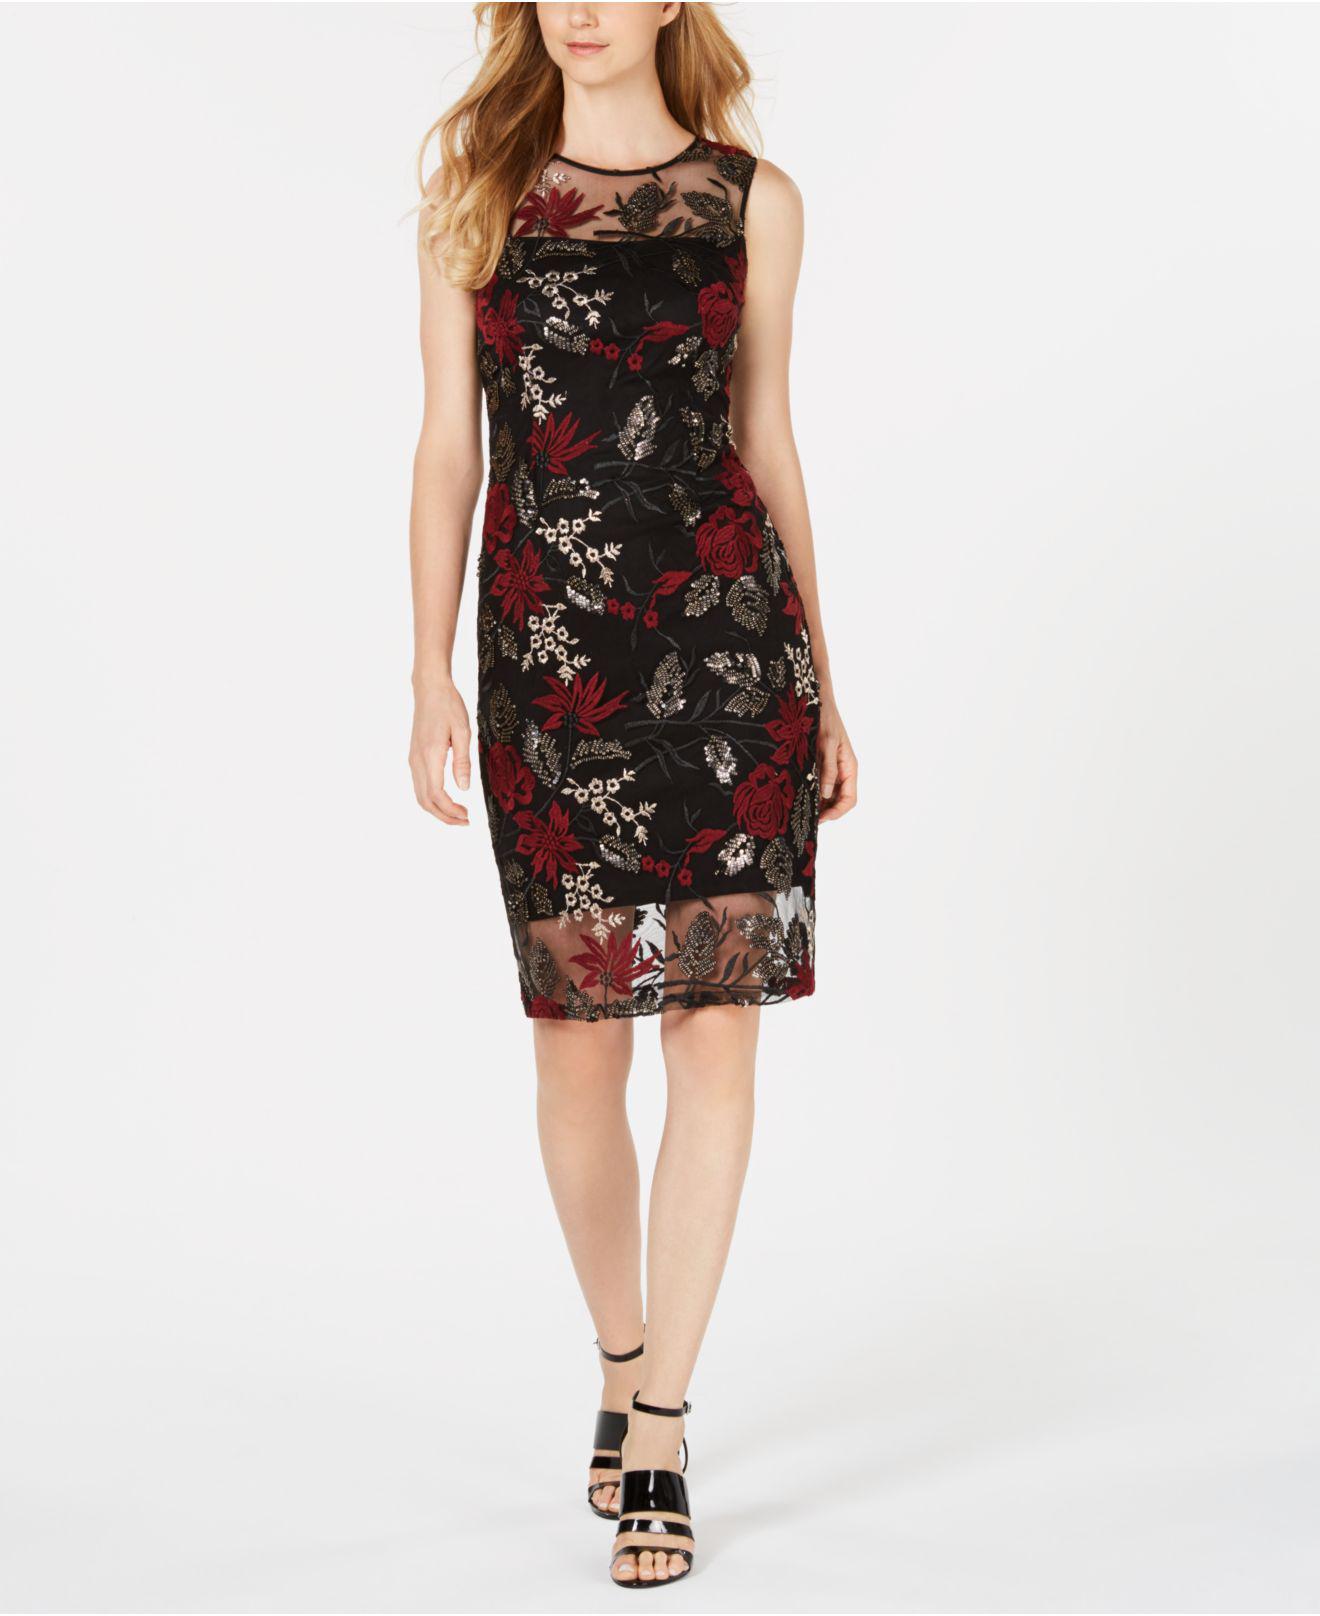 black dress with red embroidered flowers